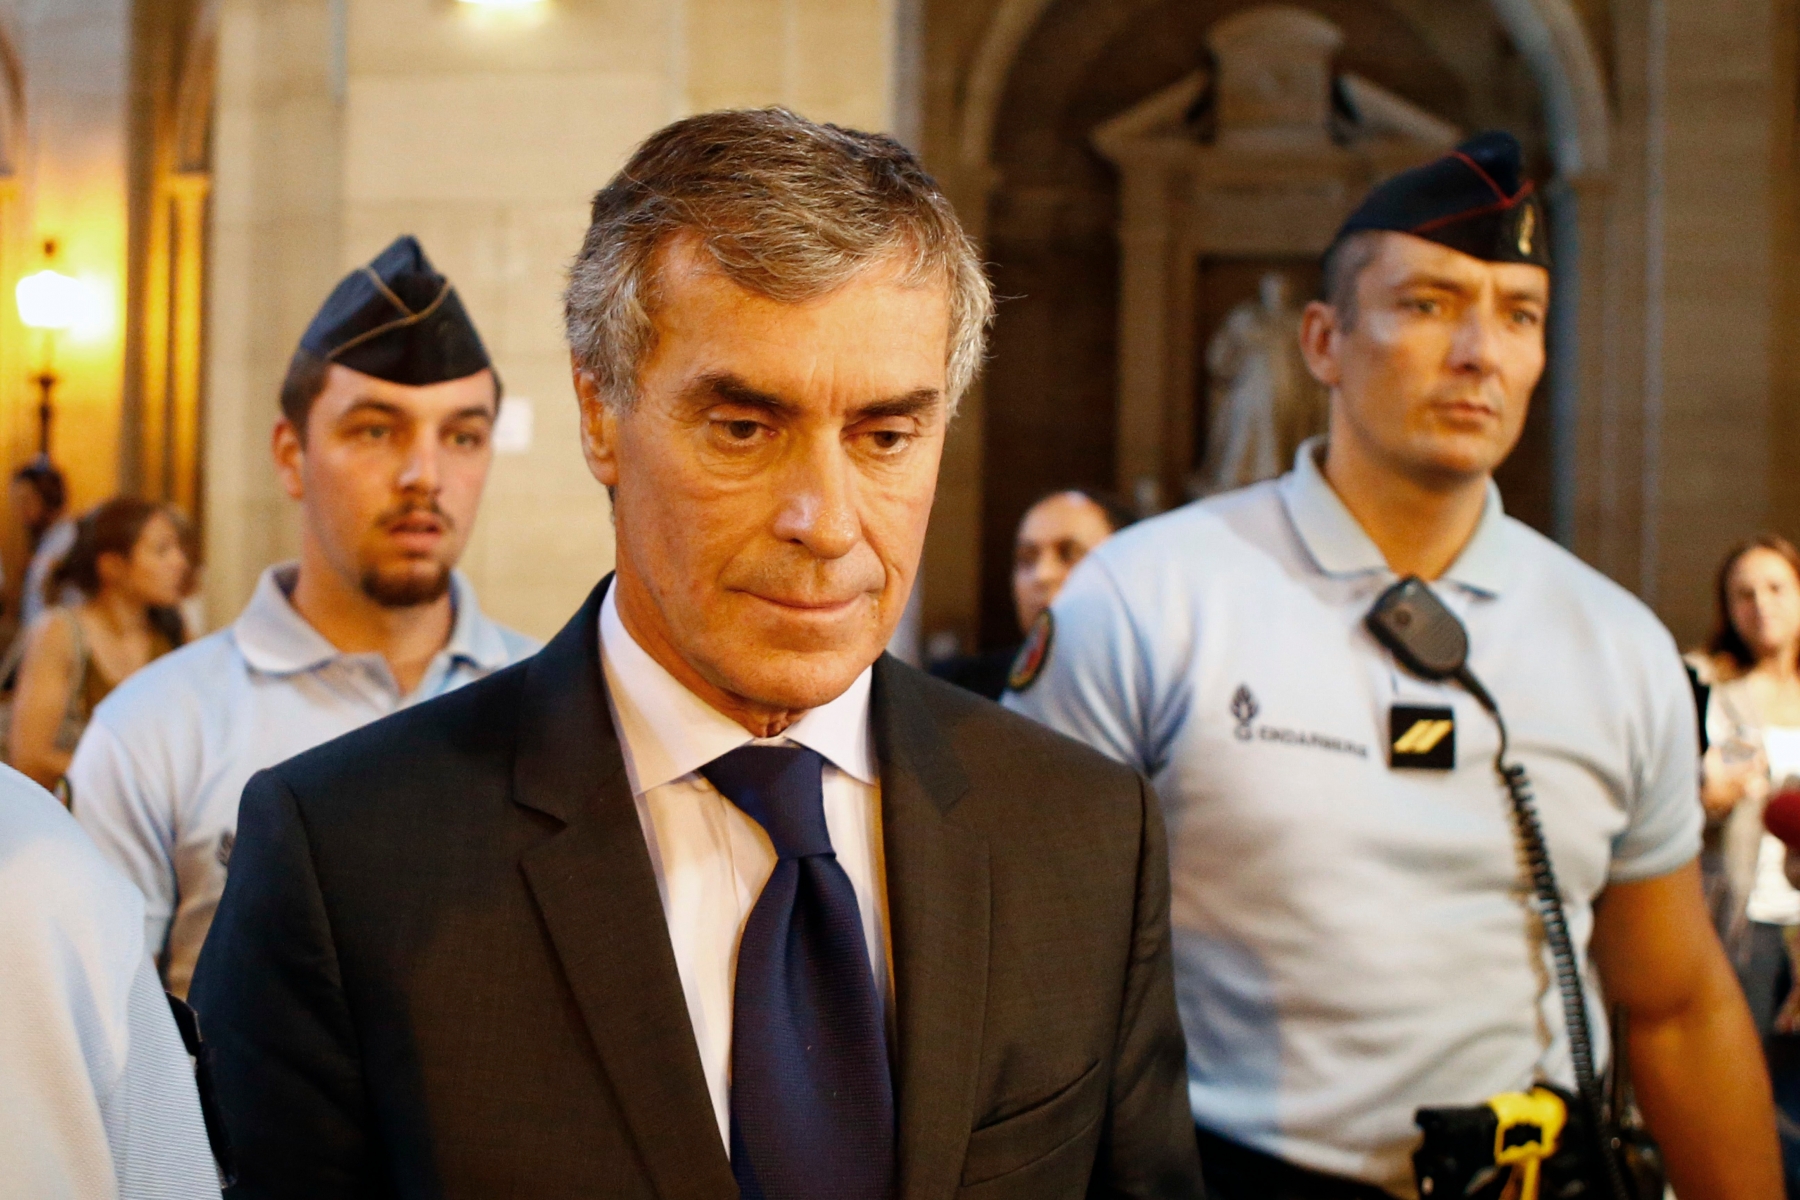 FILE - In this Wednesday, Sept. 14, 2016 file photo, former French budget minister Jerome Cahuzac leaves the courthouse, in Paris. A Paris court is preparing to return a verdict on Wednesday Dec. 7, 2016, in one of the biggest political scandals of French President Francois HollandeÄôs government. Jerome Cahuzac is charged with tax fraud and money laundering for allegedly hiding his wealth in tax havens around the world. (AP Photo/Francois Mori, File) France Tax Fraud